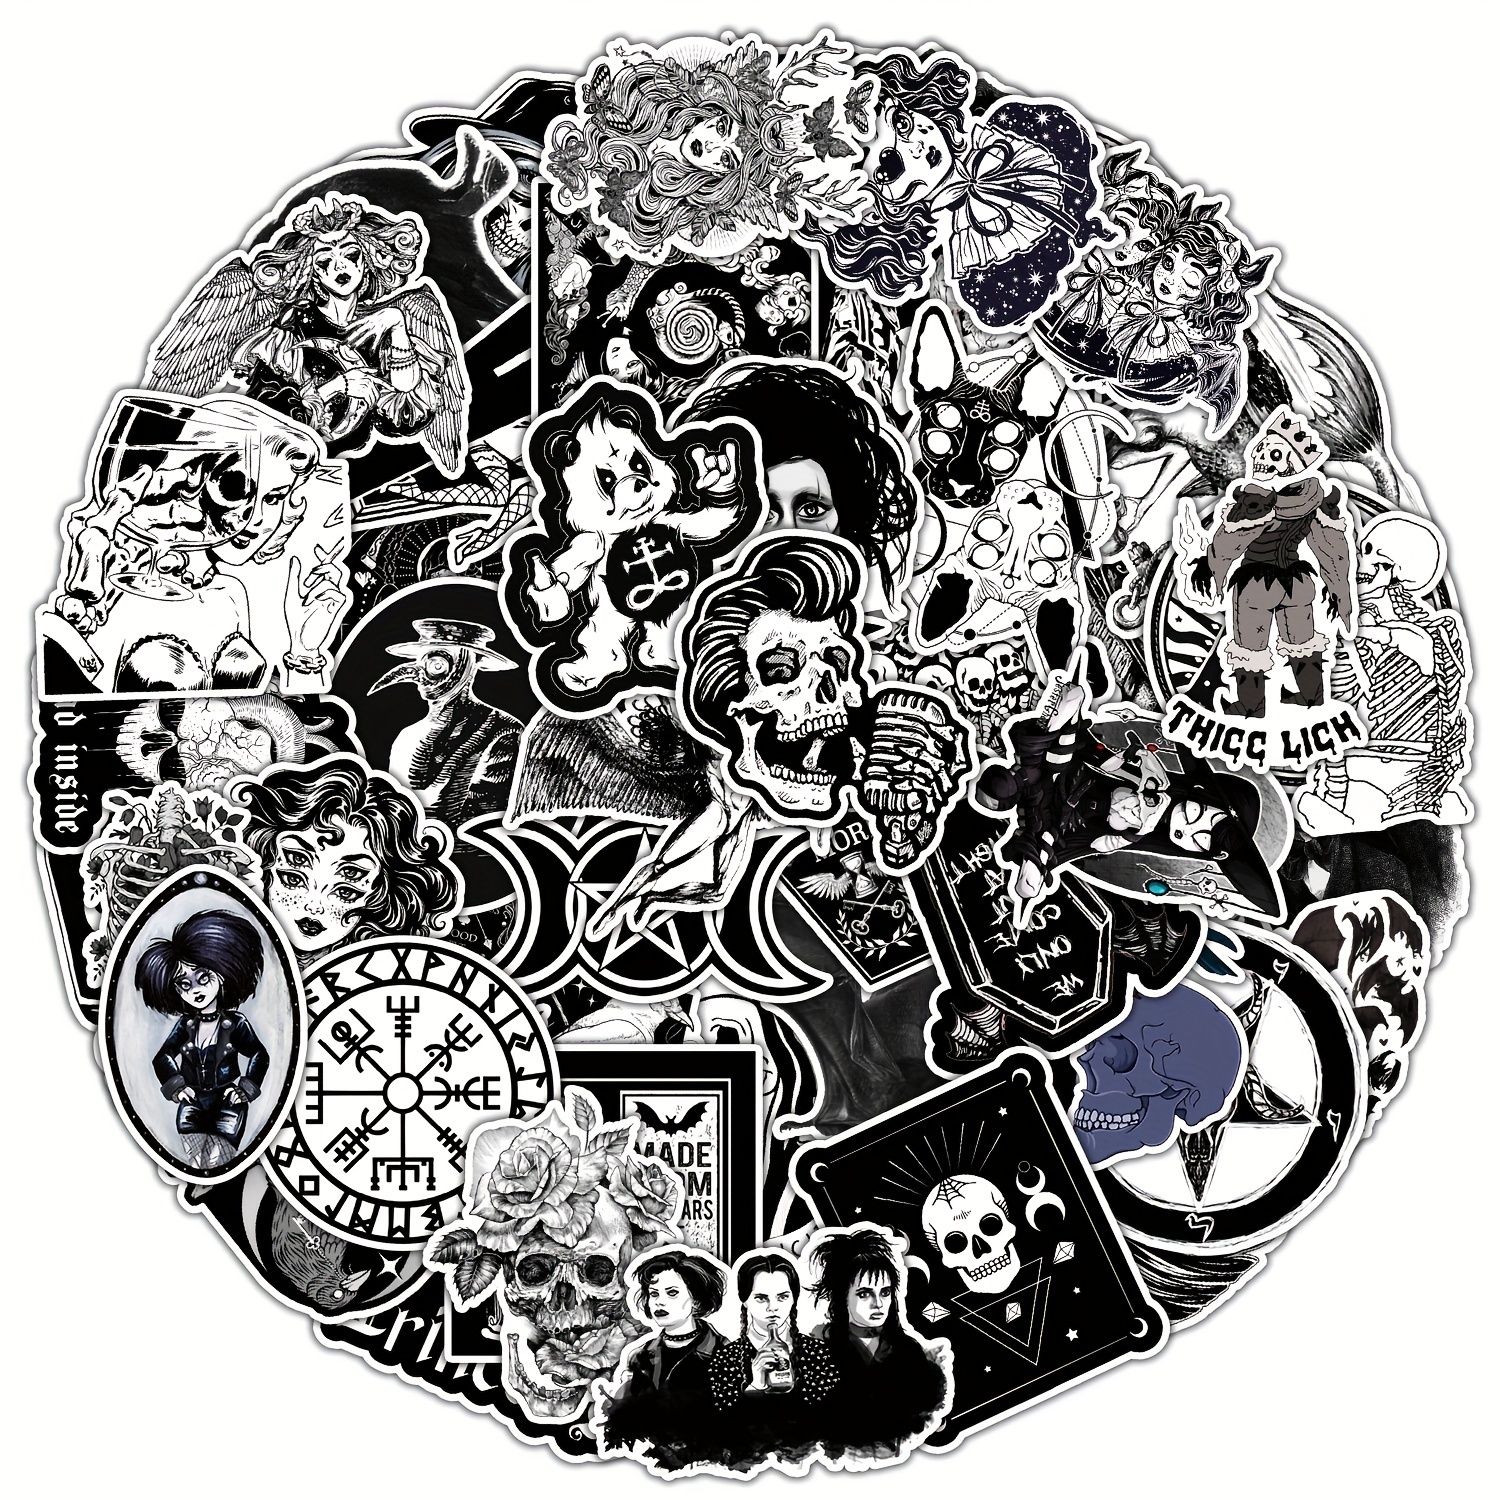 Gothic Stickers, 50 Pcs Goth Vinyl Sticker Pack, Waterproof Skeleton  Stickers for Laptops, Water Bottles, Phone Case, Skull Stickers Decals for  Teens and Adults